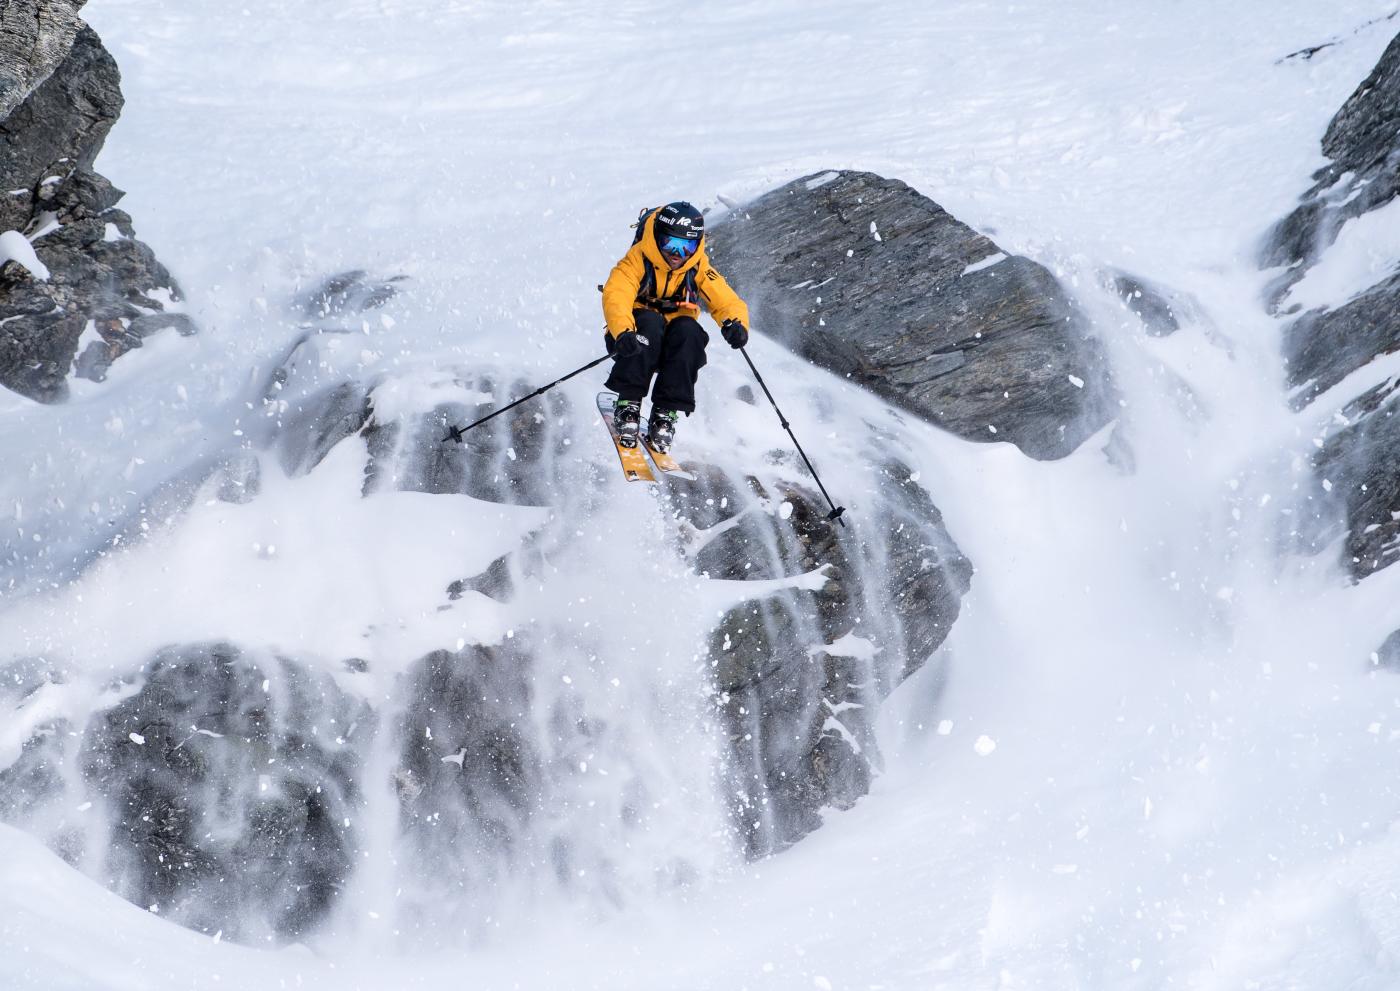 Freeskier Pete Oswald skiing down a rocky mountain face